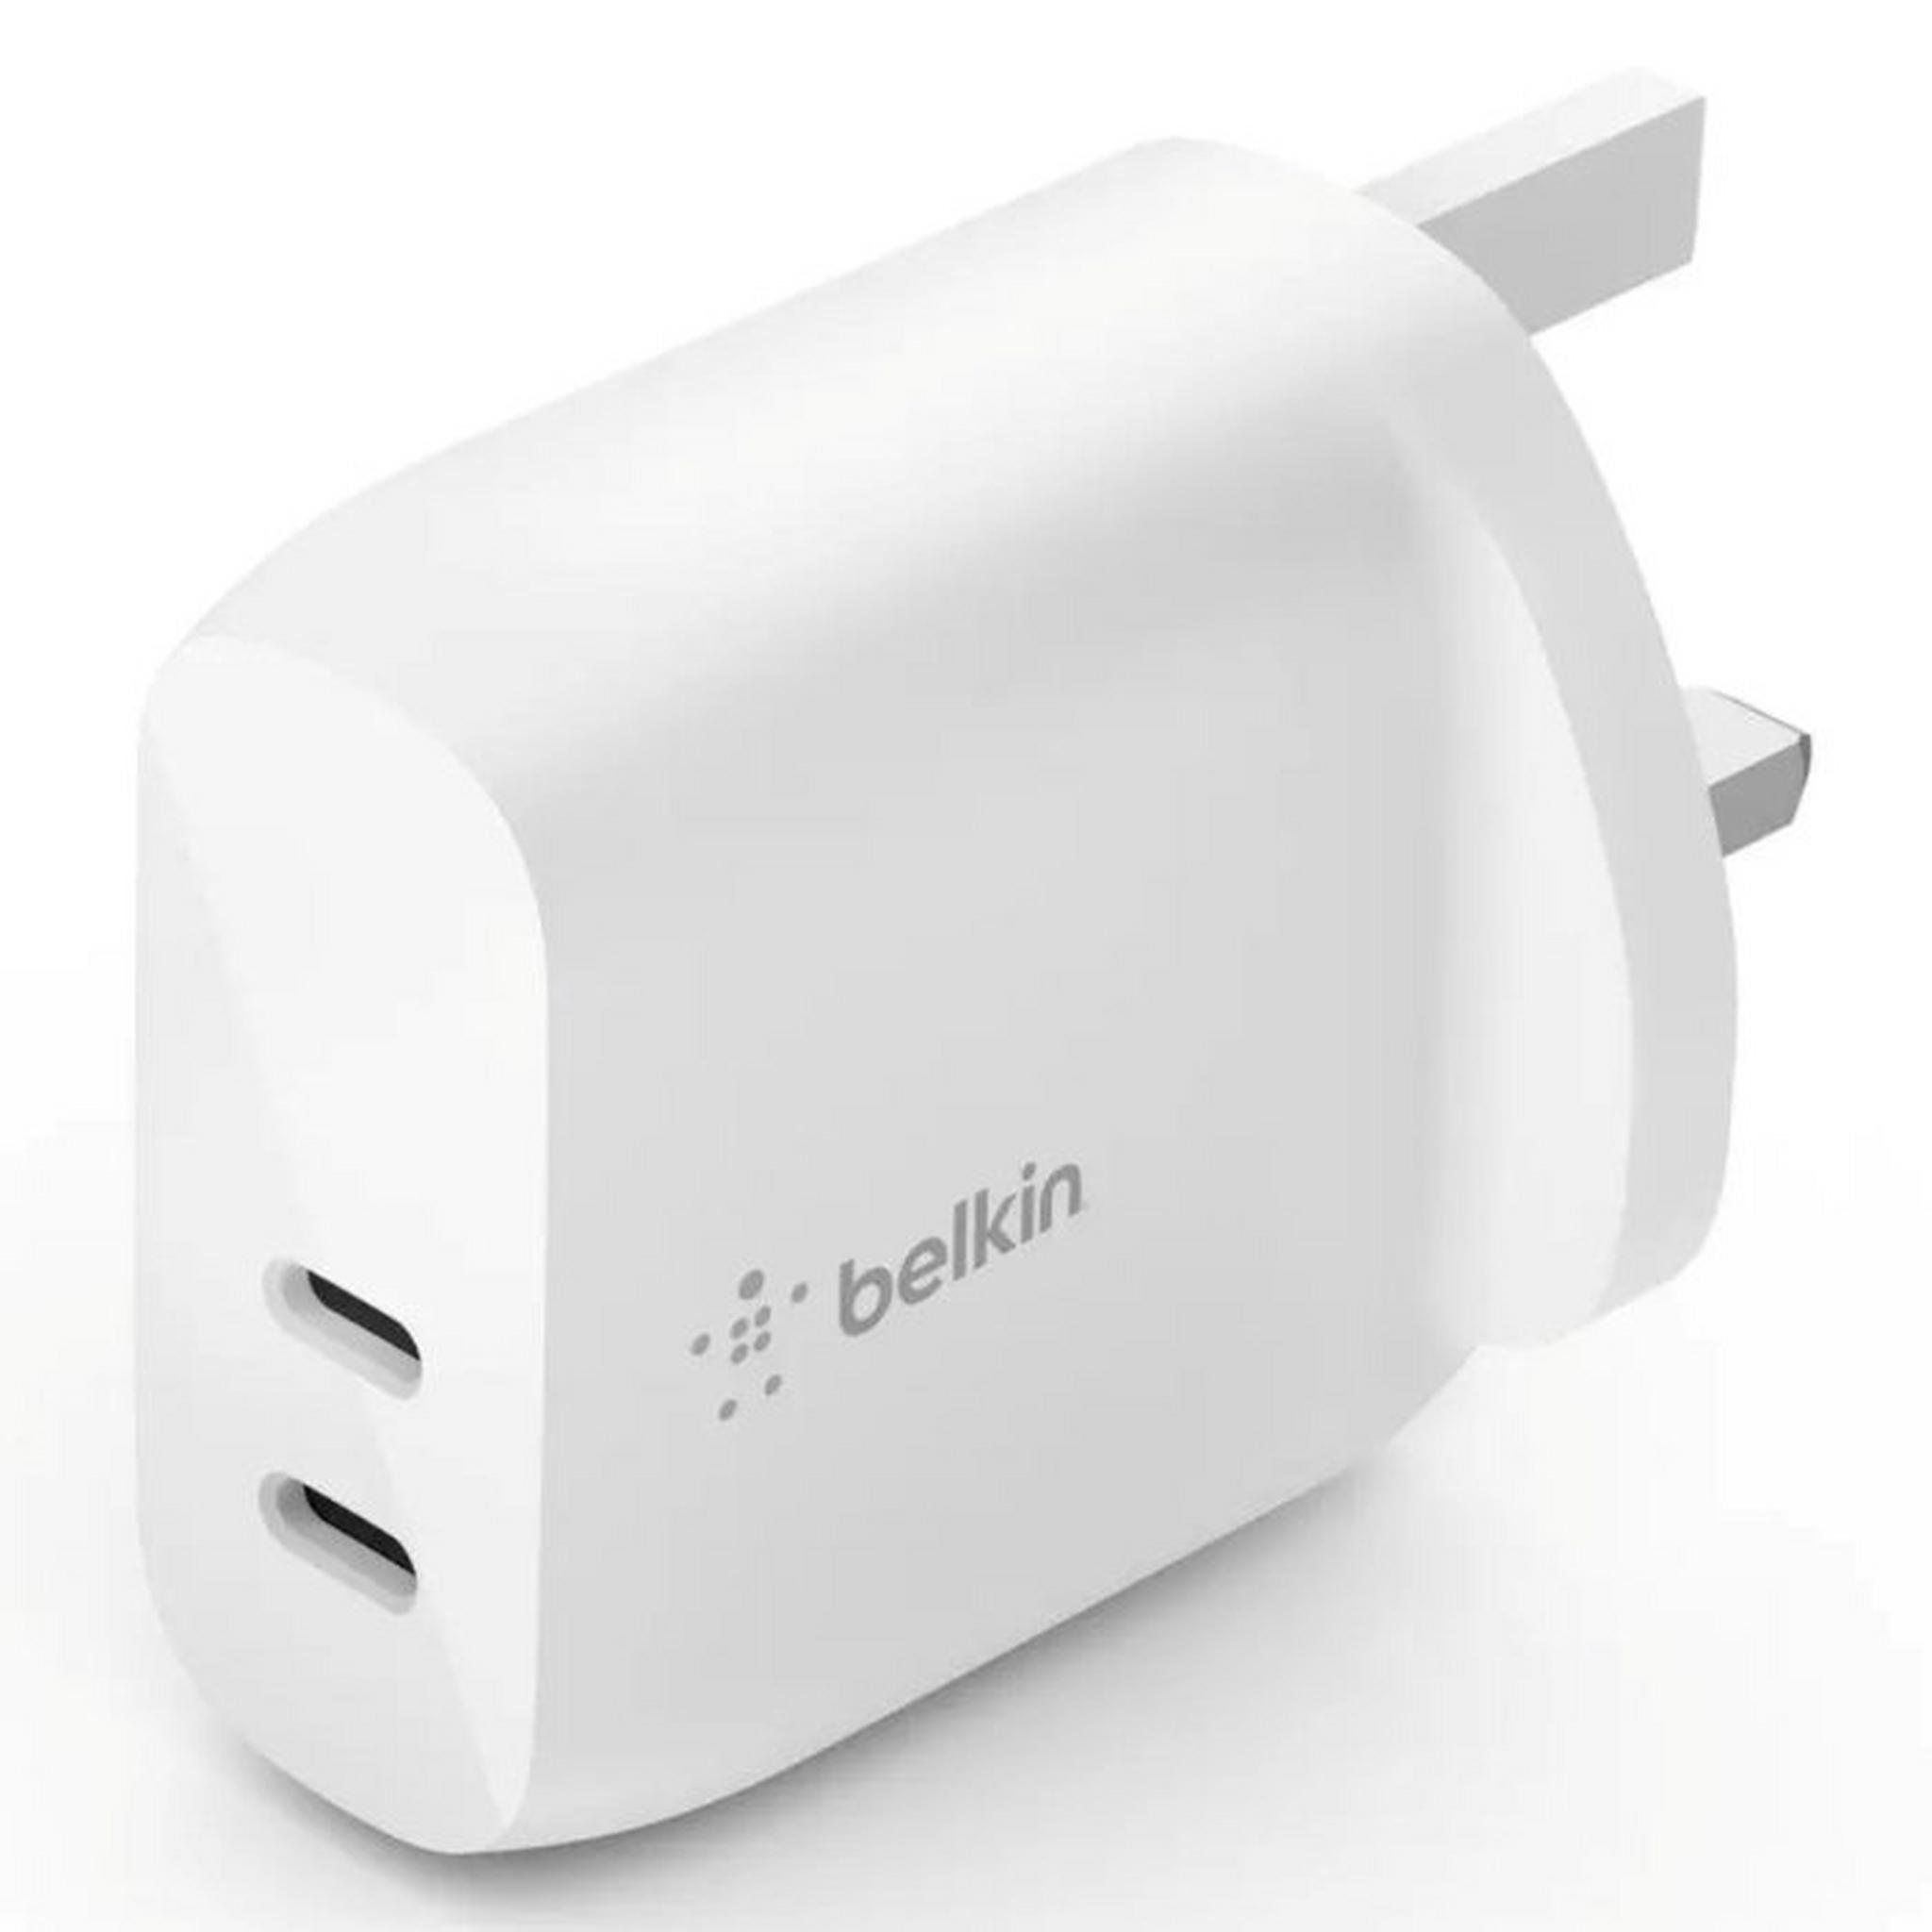 Belkin Adapter Dual USB-C Wall Charger 40W - White (WCB006myWH)